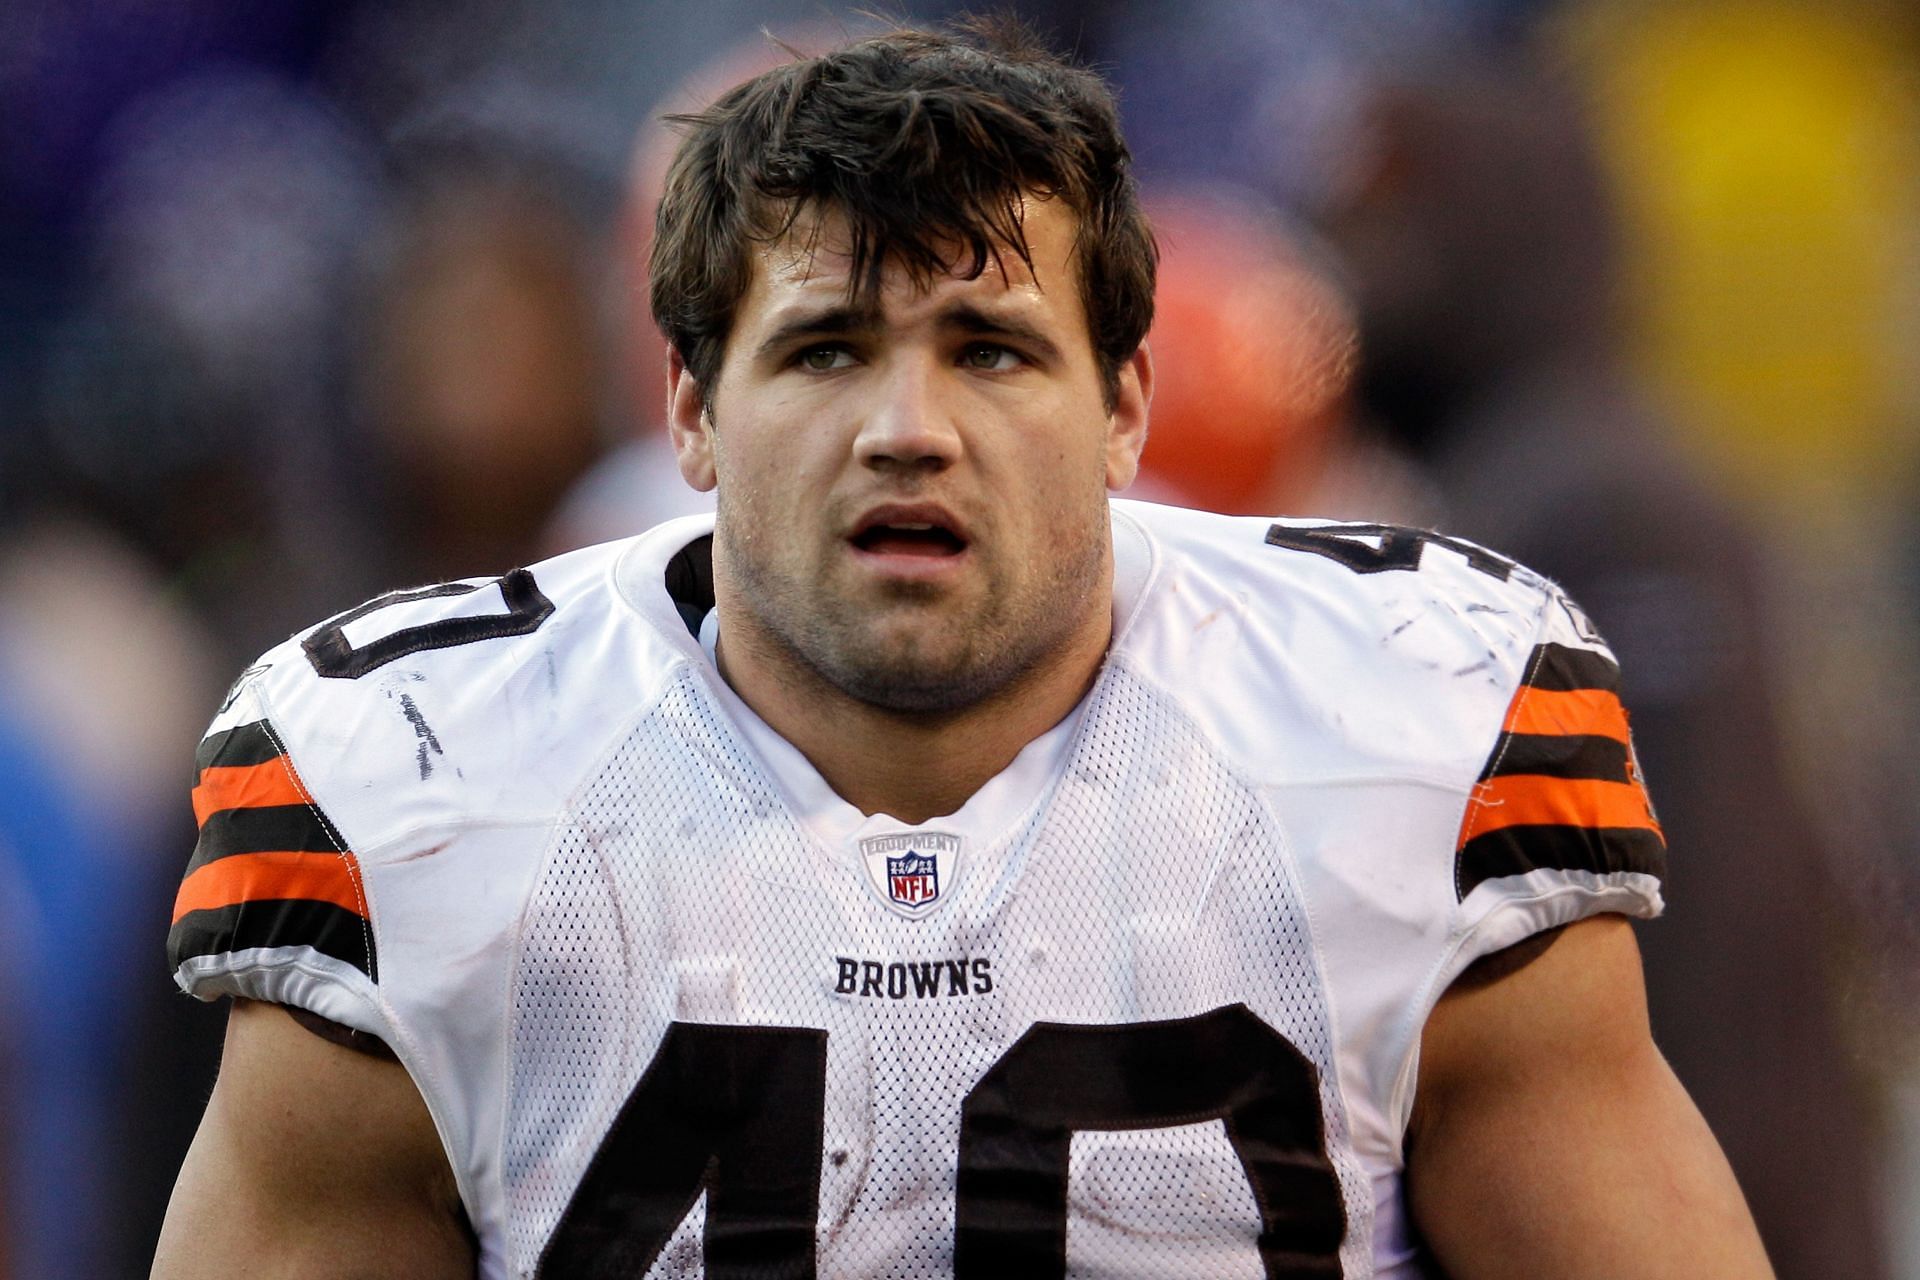 Peyton Hillis with the Cleveland Browns